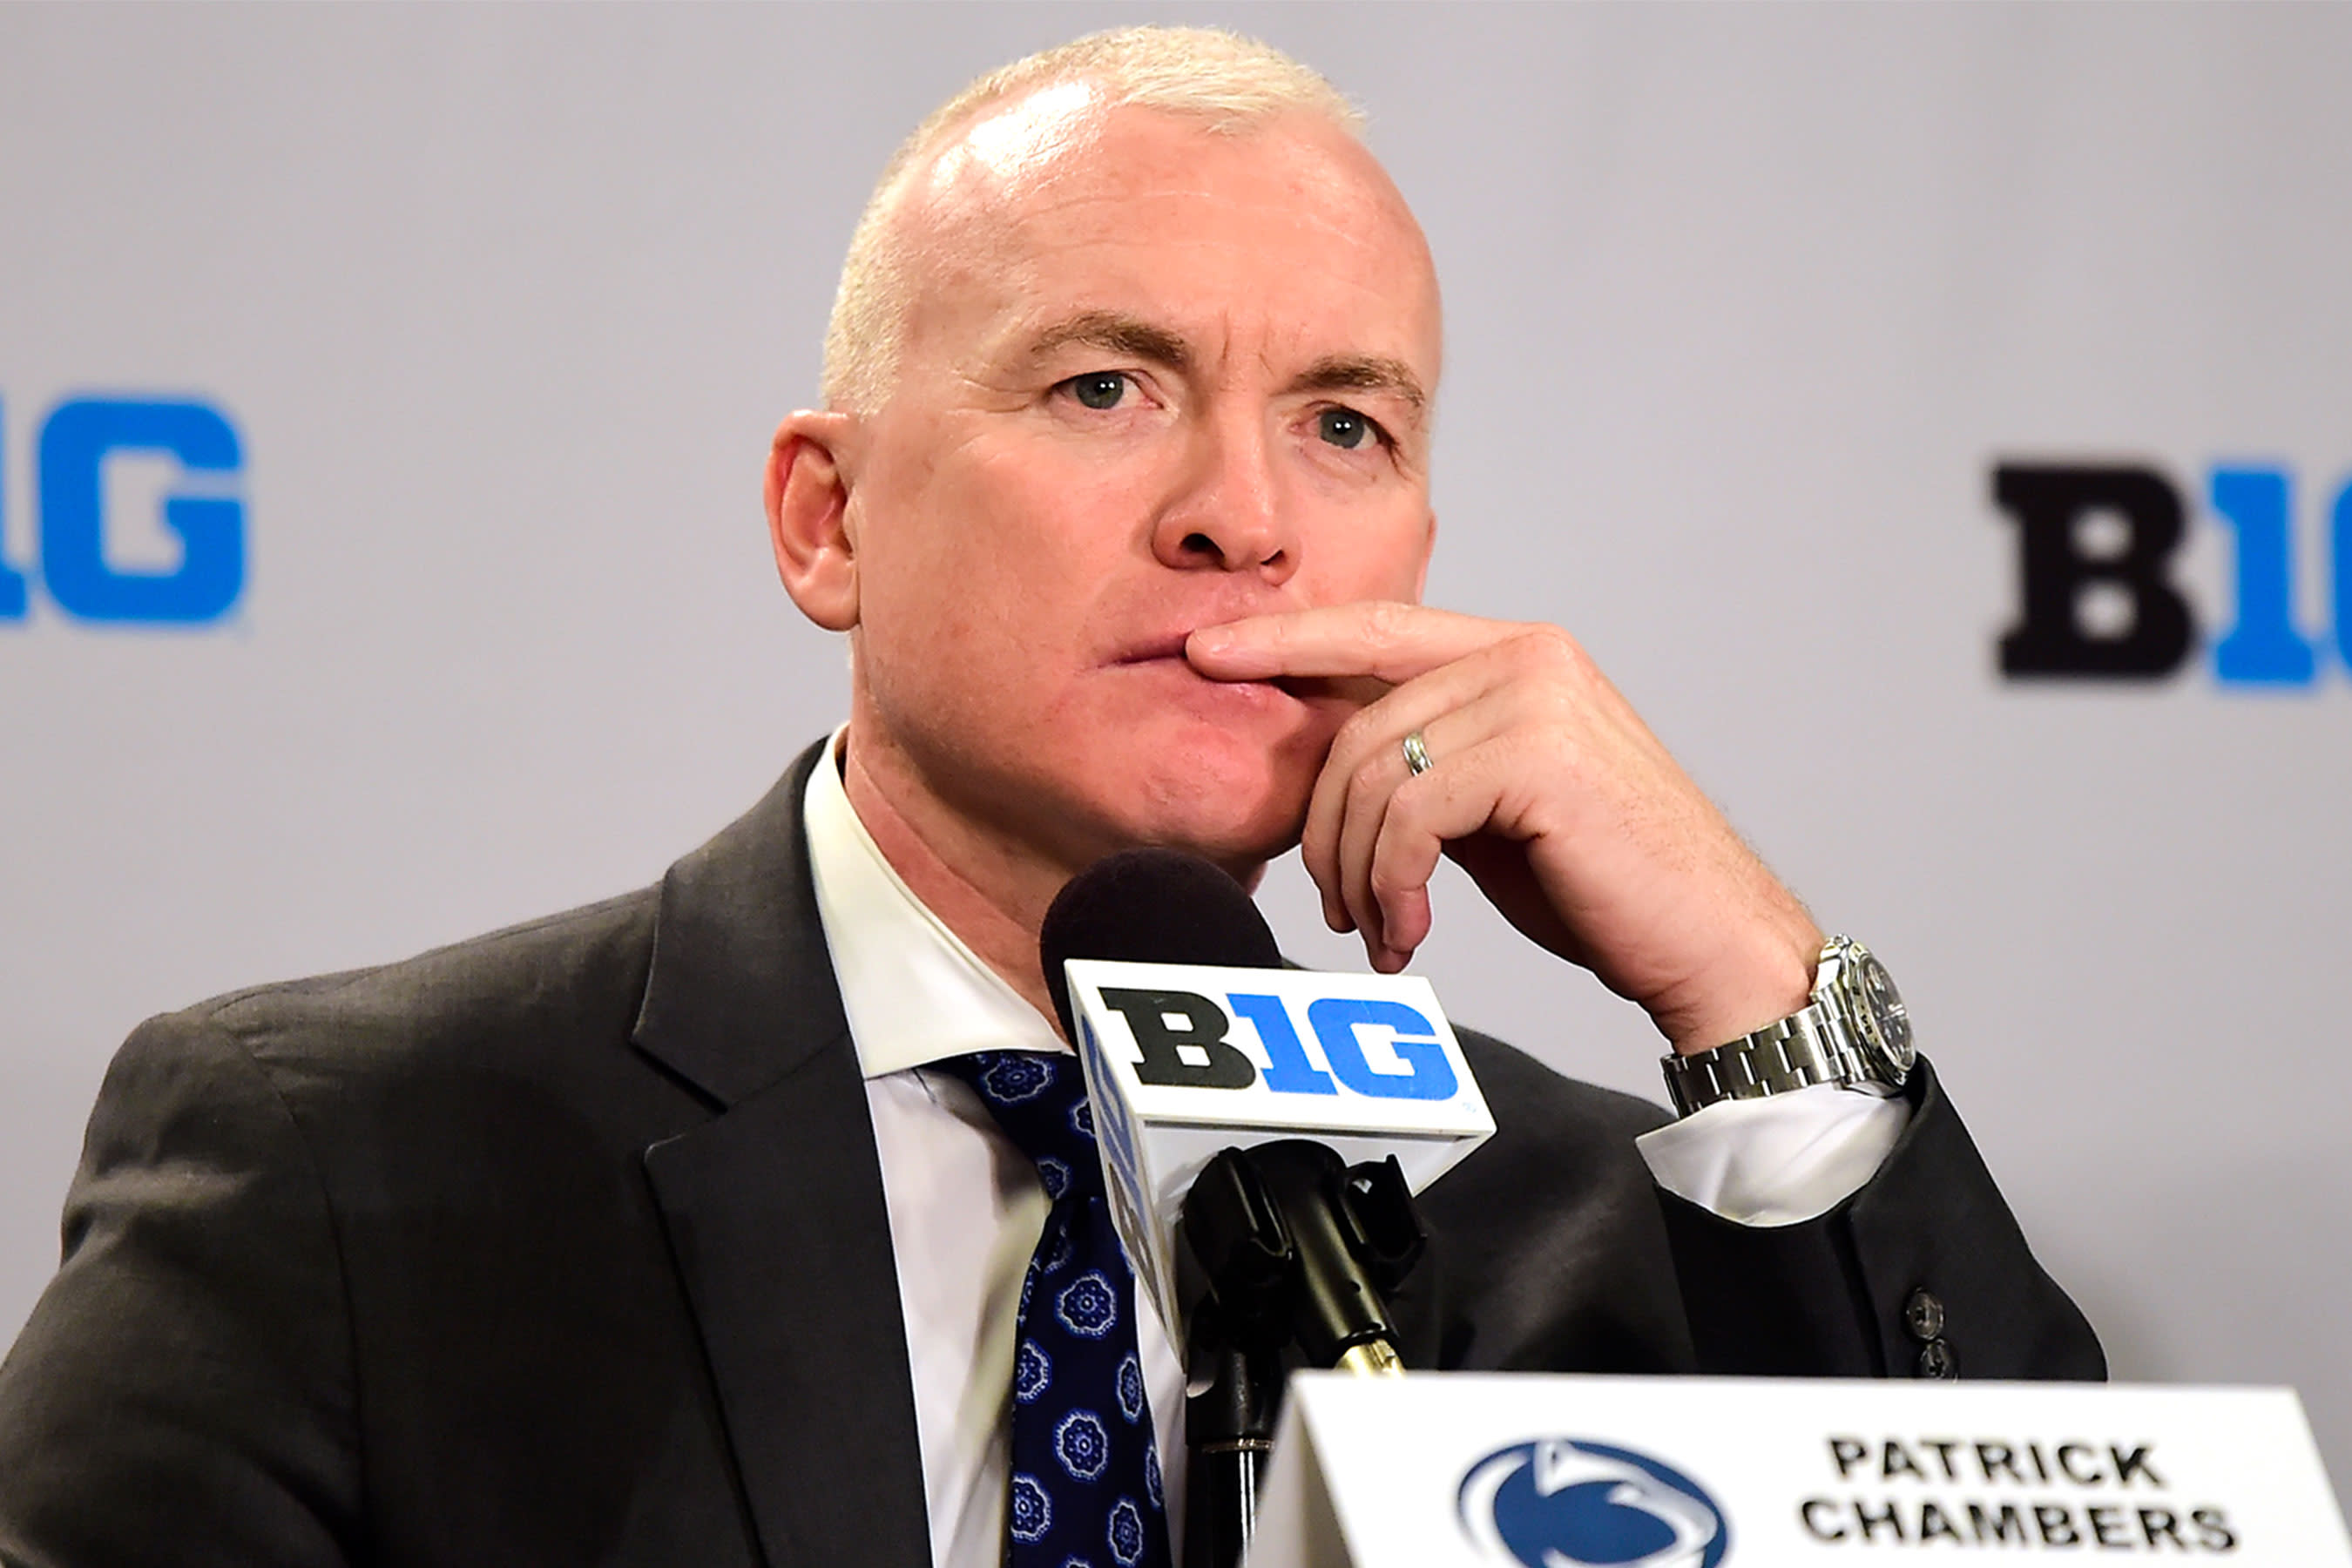 penn-state-basketball-coach-apologizes-after-he-is-caught-on-video